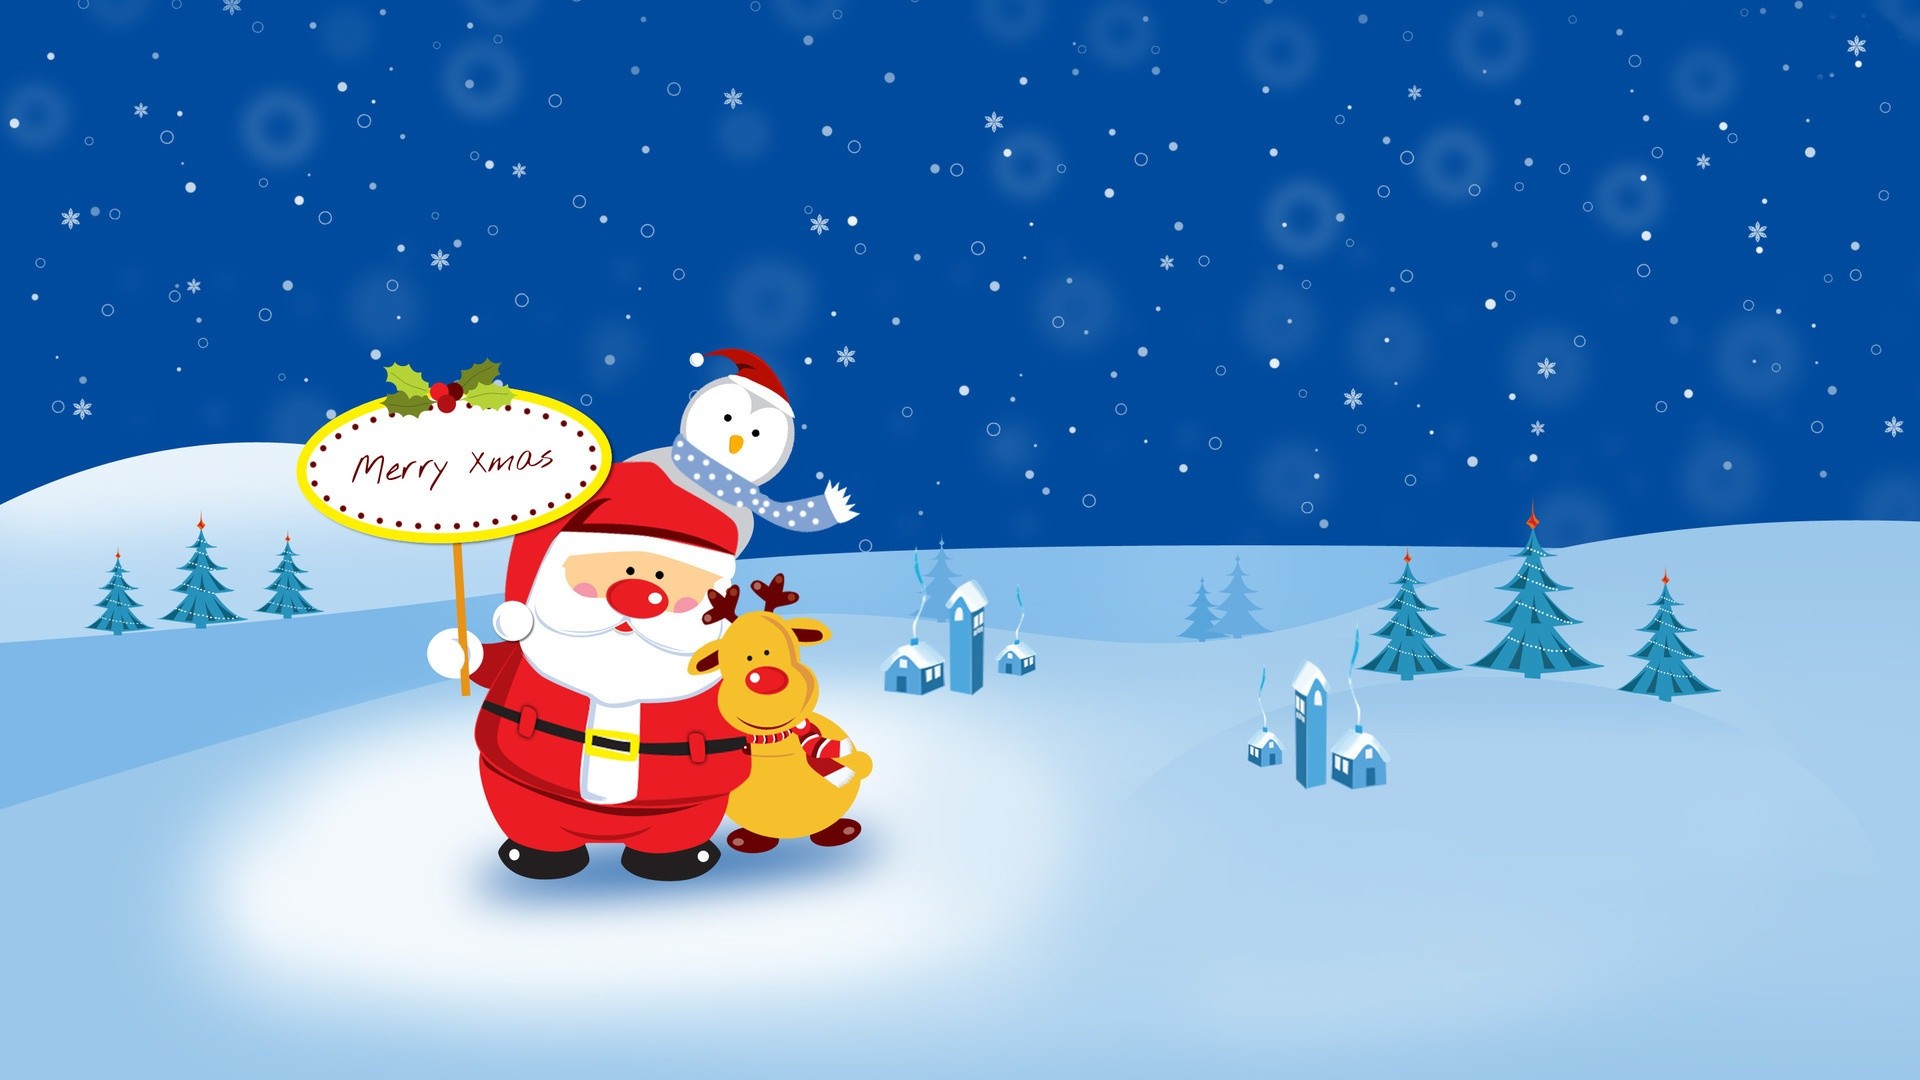 1920x1080 Cute Christmas Backgrounds (16)